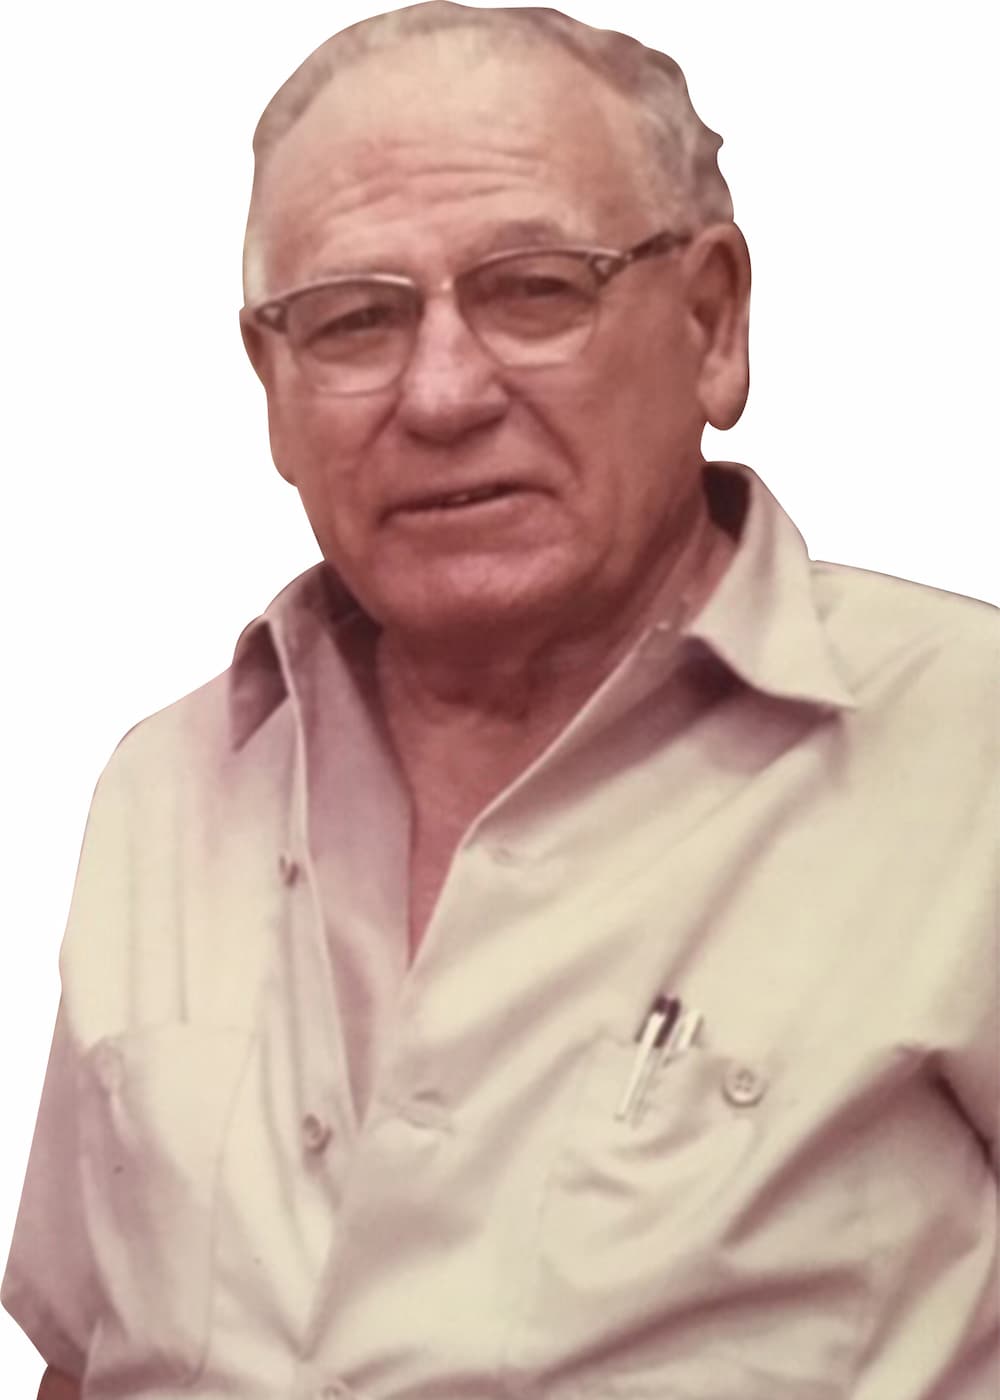 A person with white hair and glasses wearing a white button-up shirt.